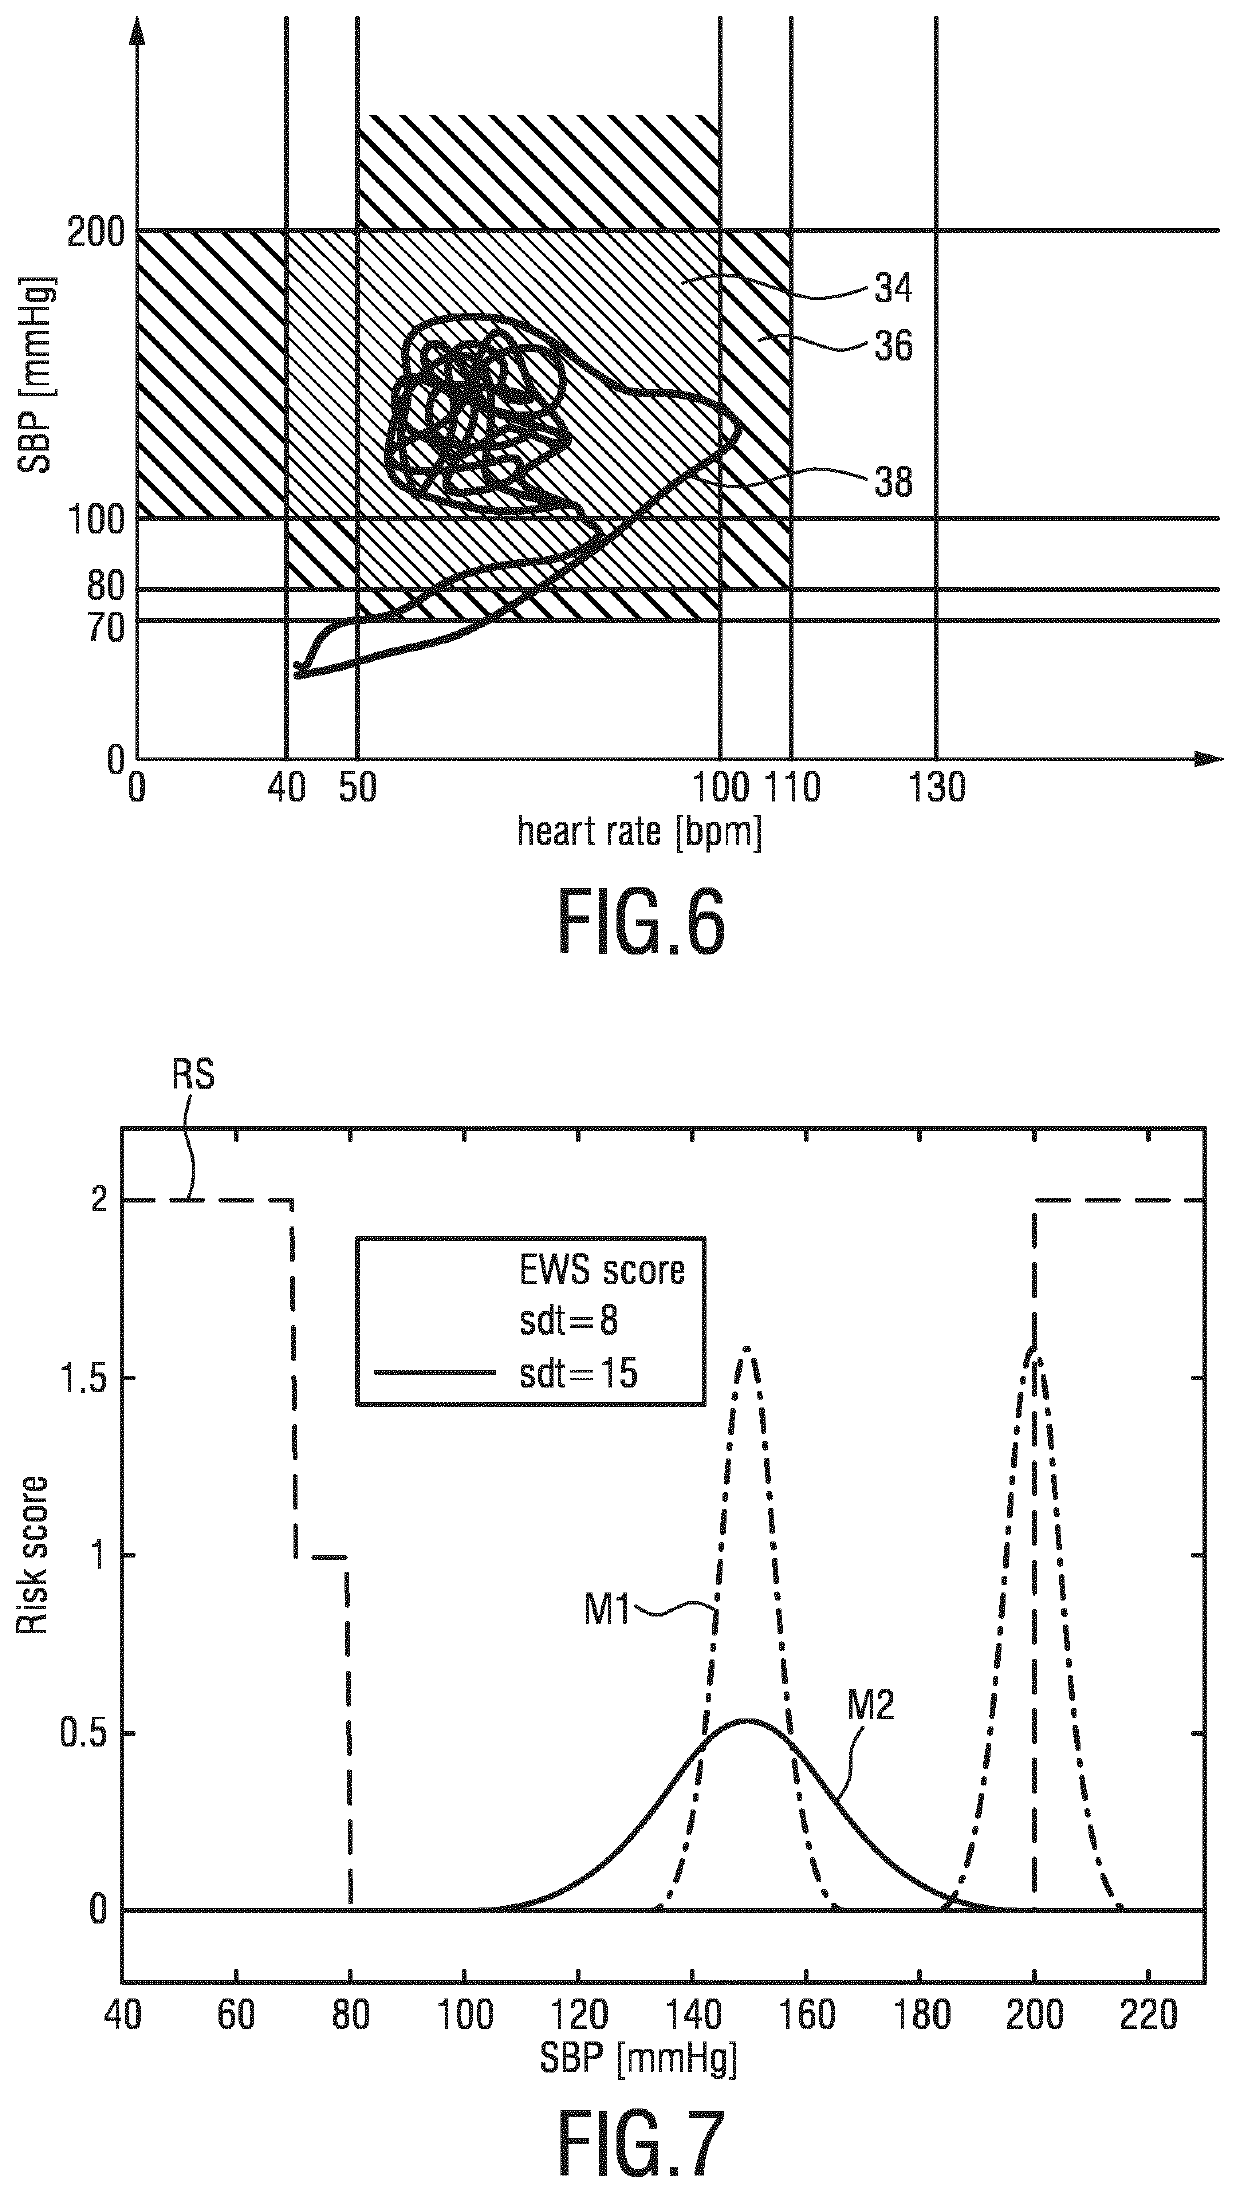 Apparatus and method for providing a control signal for a blood pressure measurement device